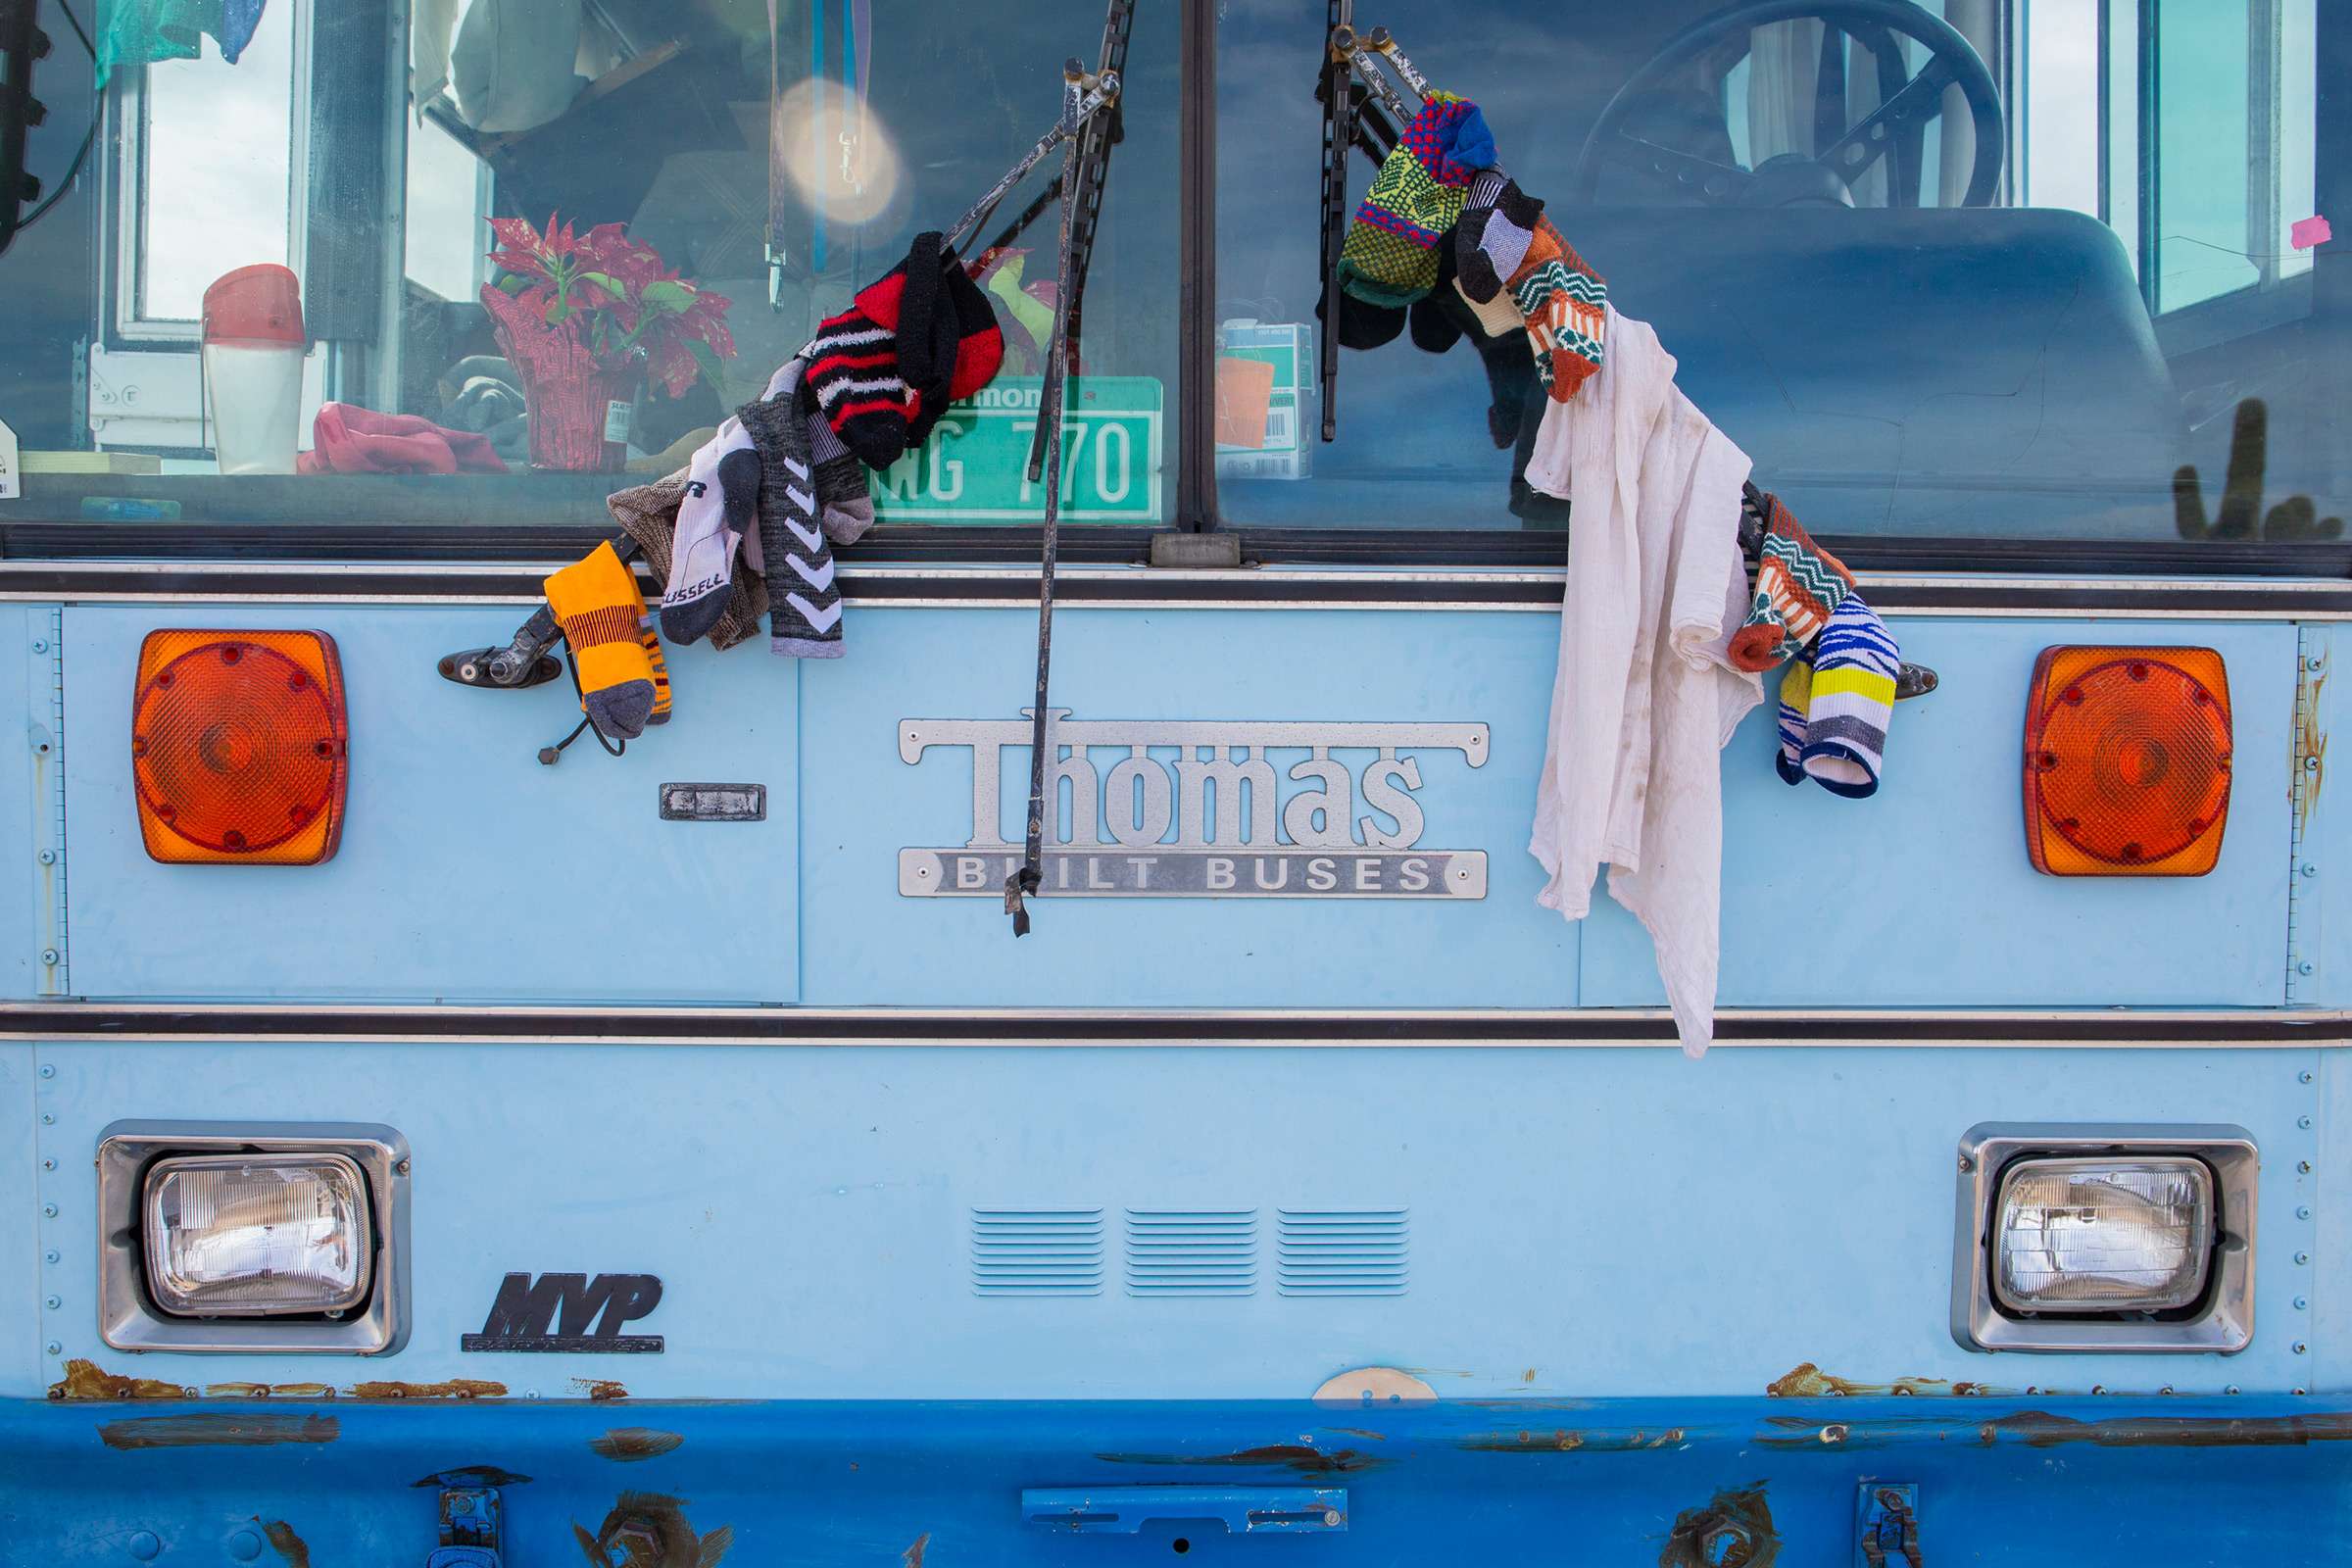 Paula and Max hang laundry on the bus to dry. (Nina Riggio for TIME)